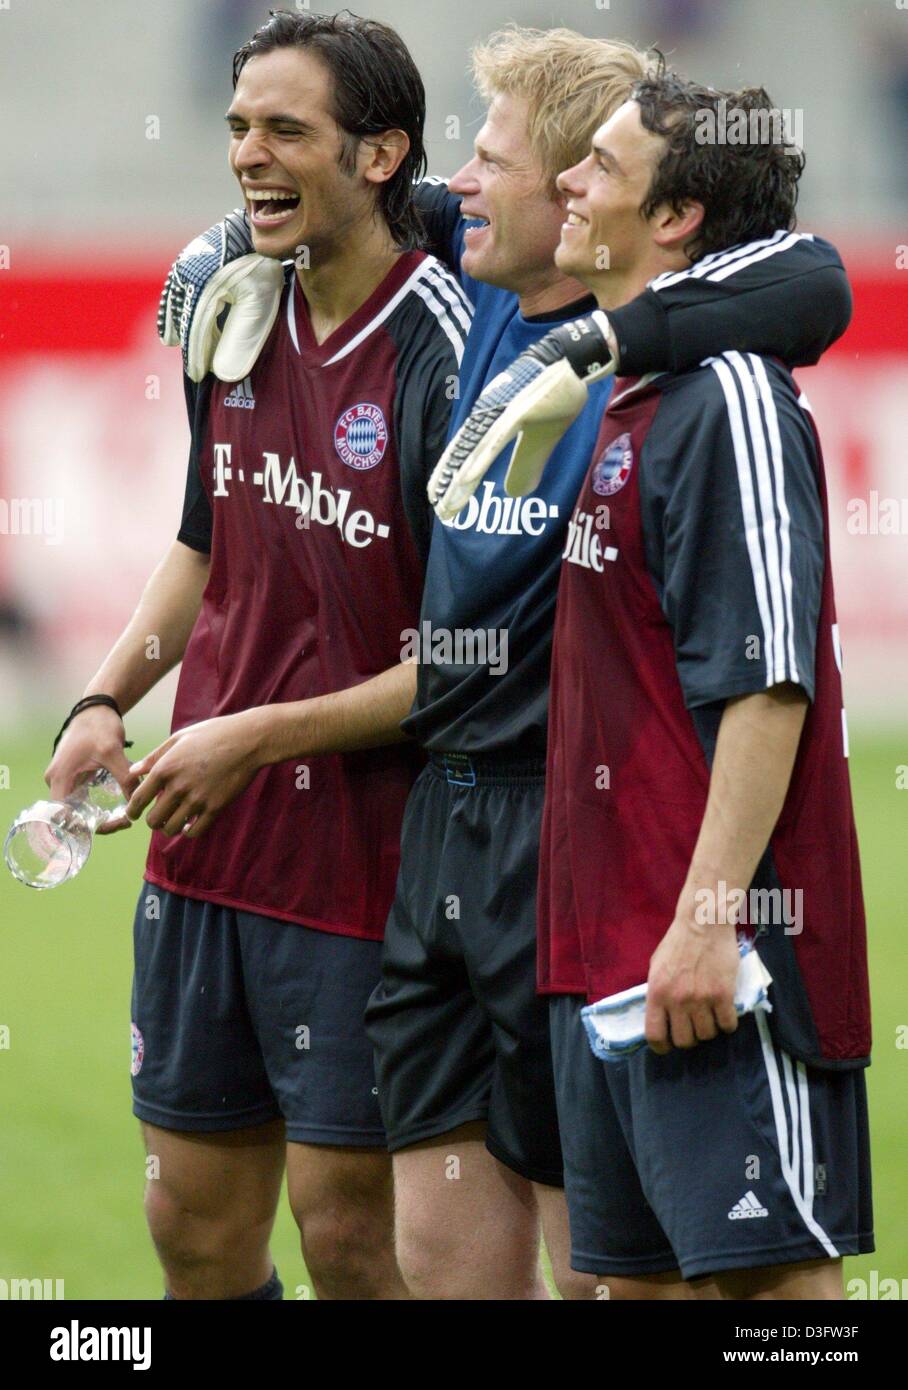 dpa) - Bayern's goalkeeper and team captain Oliver Kahn (C) lays his arms  around his team mates Roque Santa Cruz (L) and Markus Feulner after Bayern  Munich won the German championship title